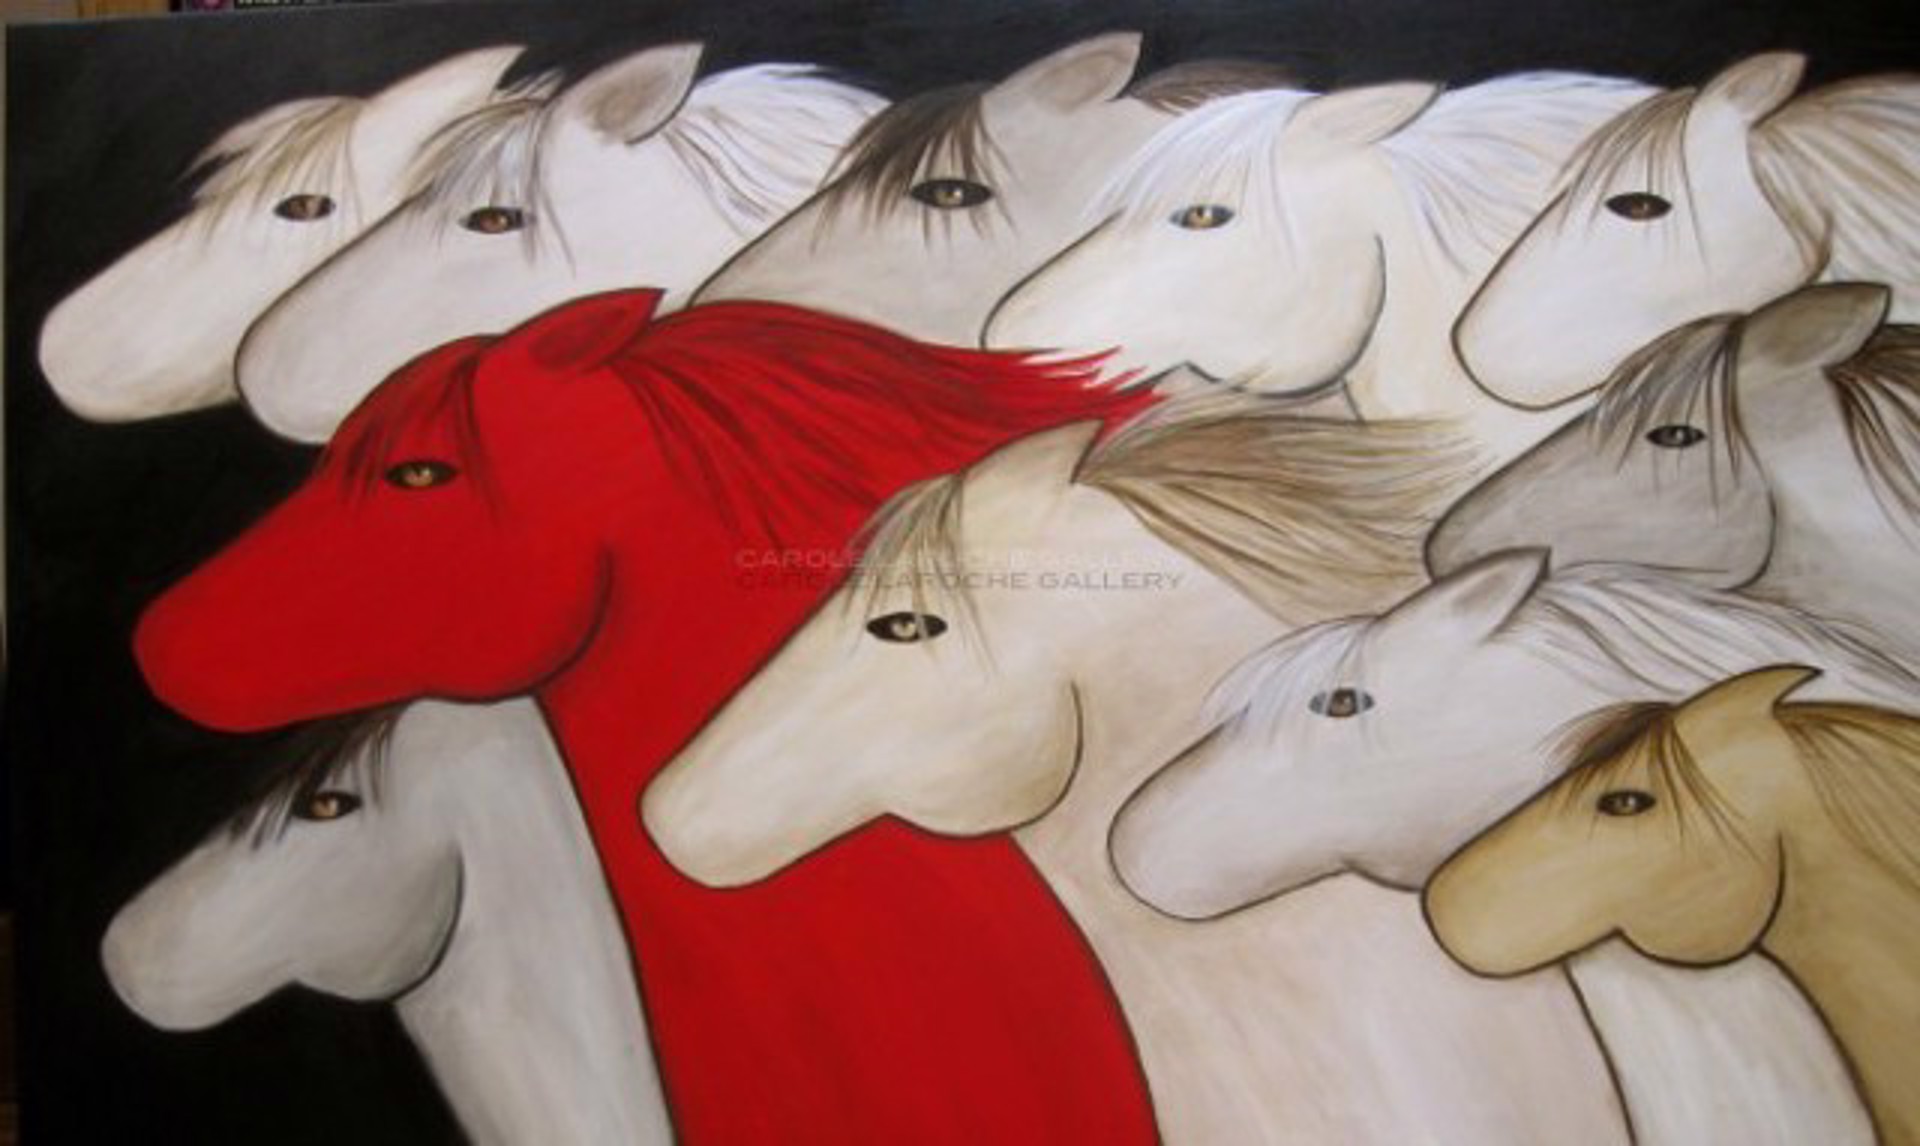 Red Pony Giclee on canvas 21/100 by Carole LaRoche